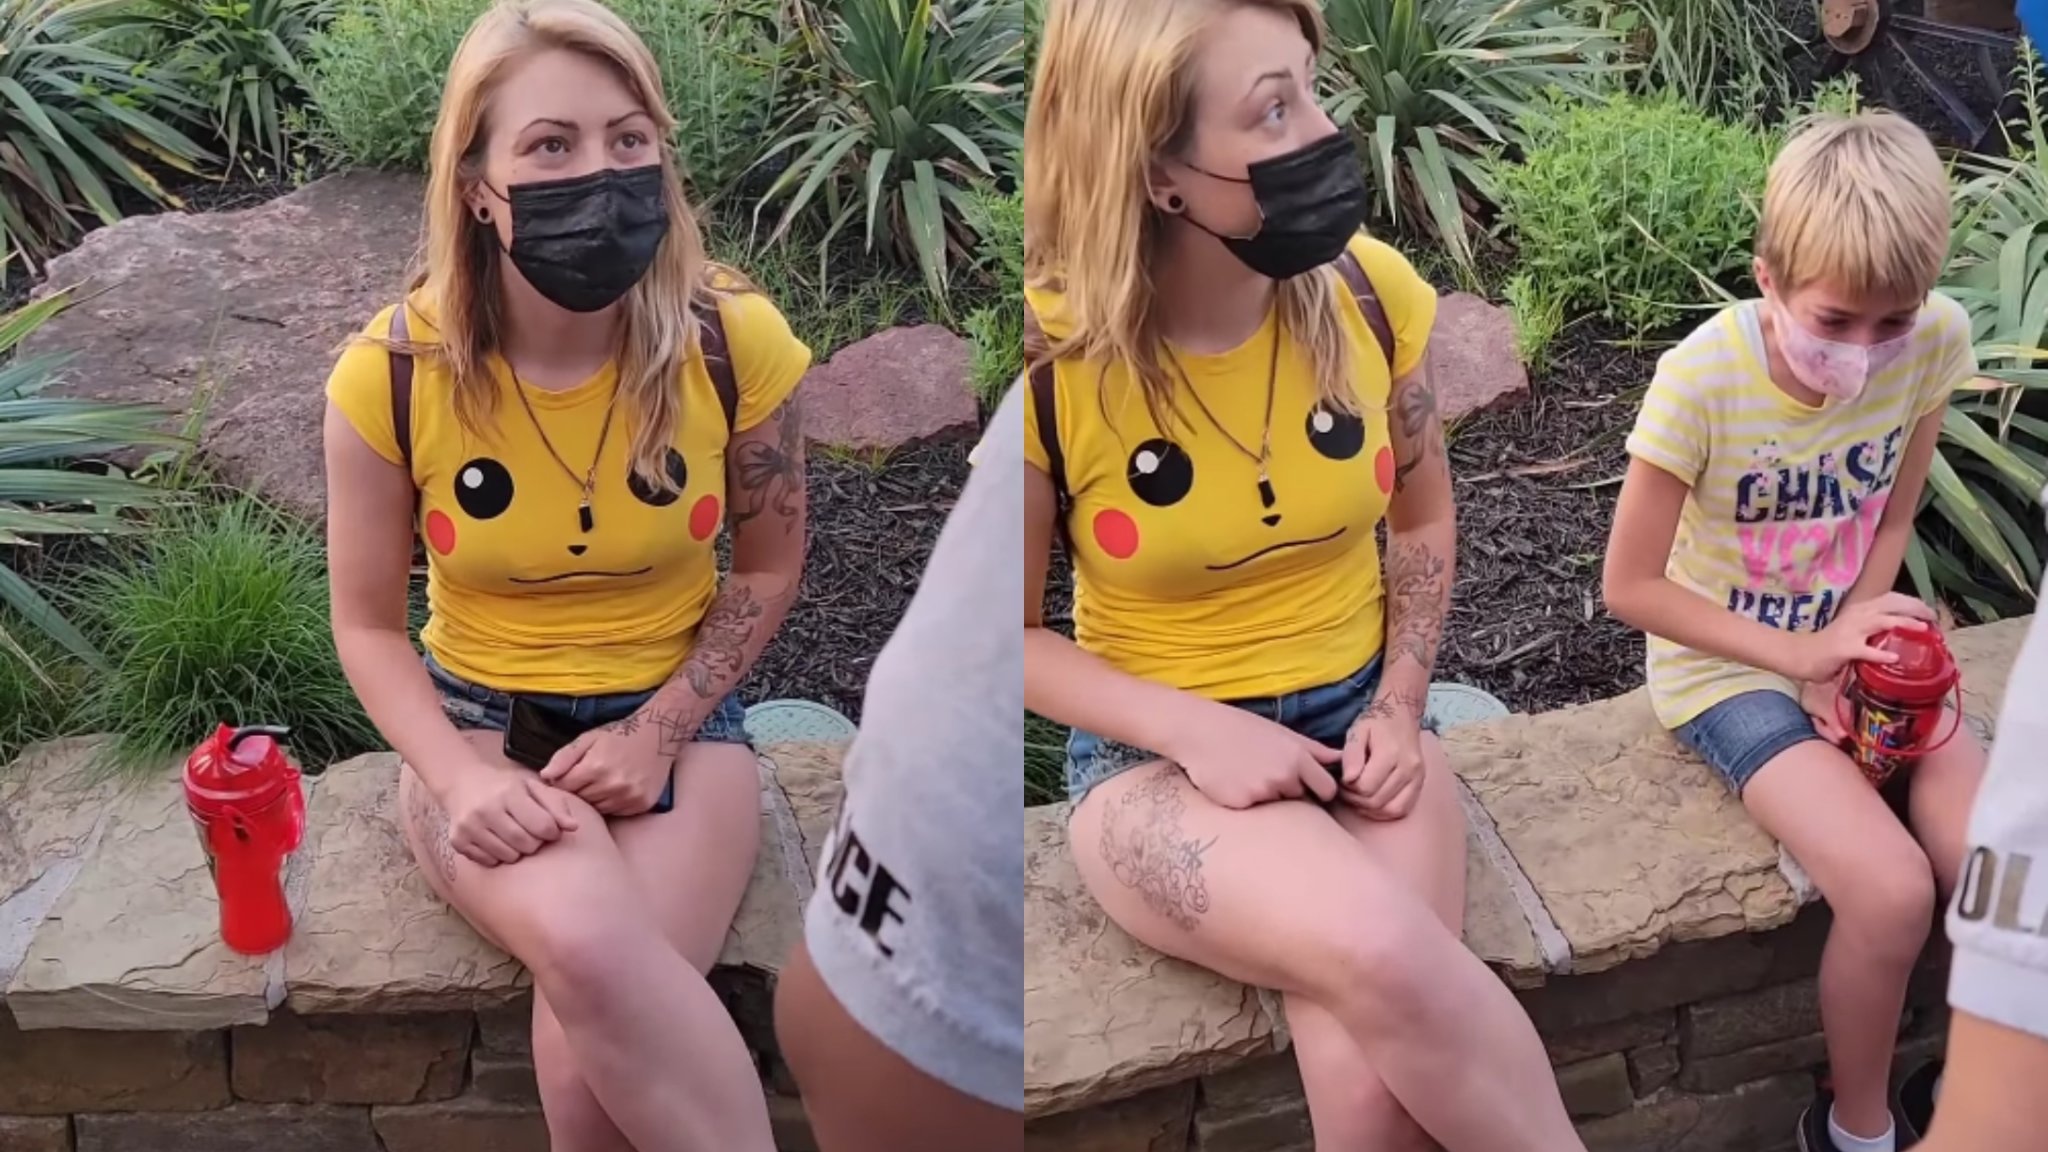 Woman Says She Was Body-Shamed & Kicked Out of Six Flags All Because of Her Shorts